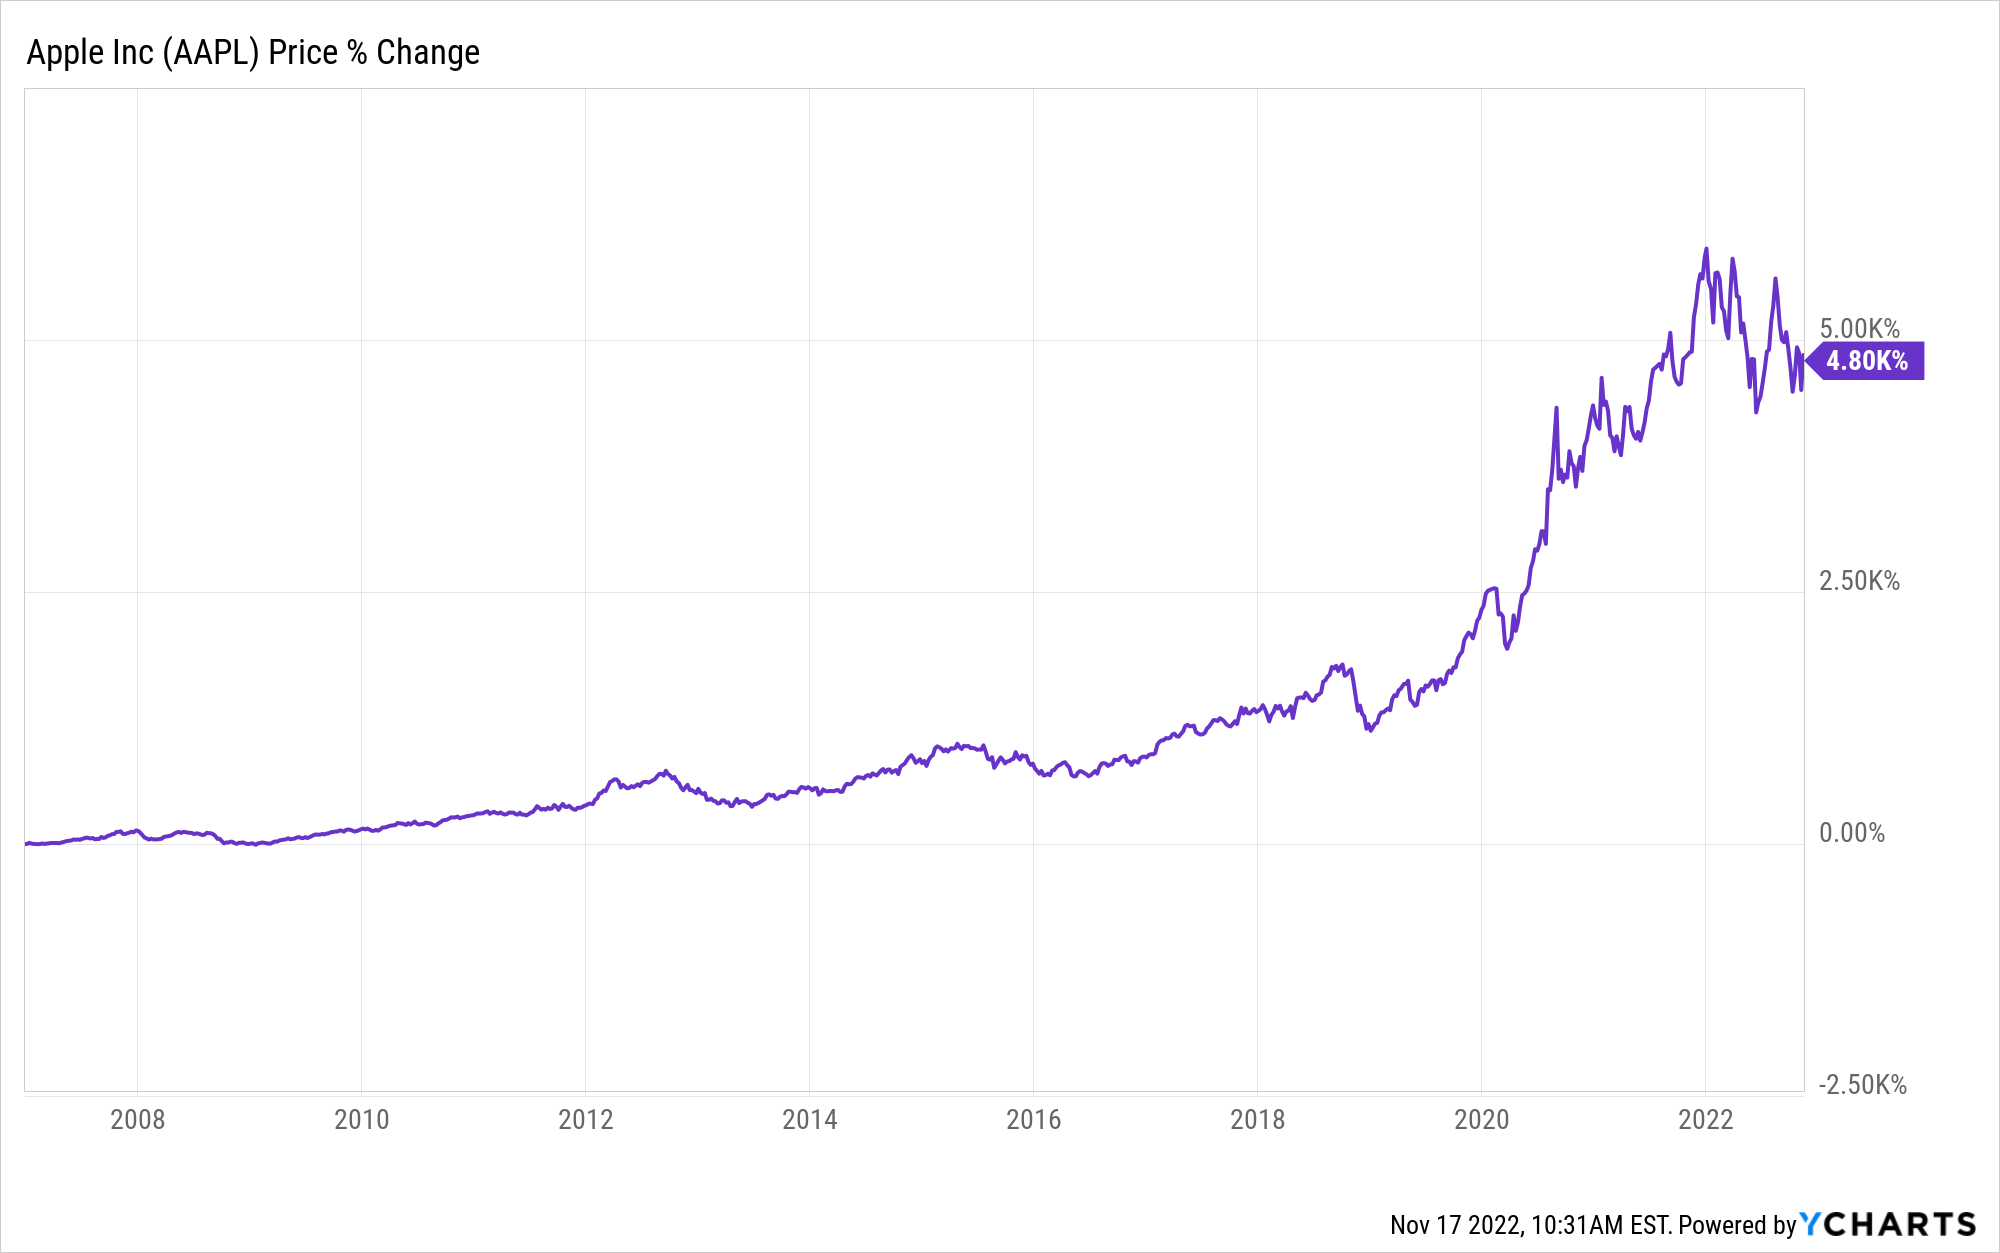 A graph showing the change in Apple stock price over time